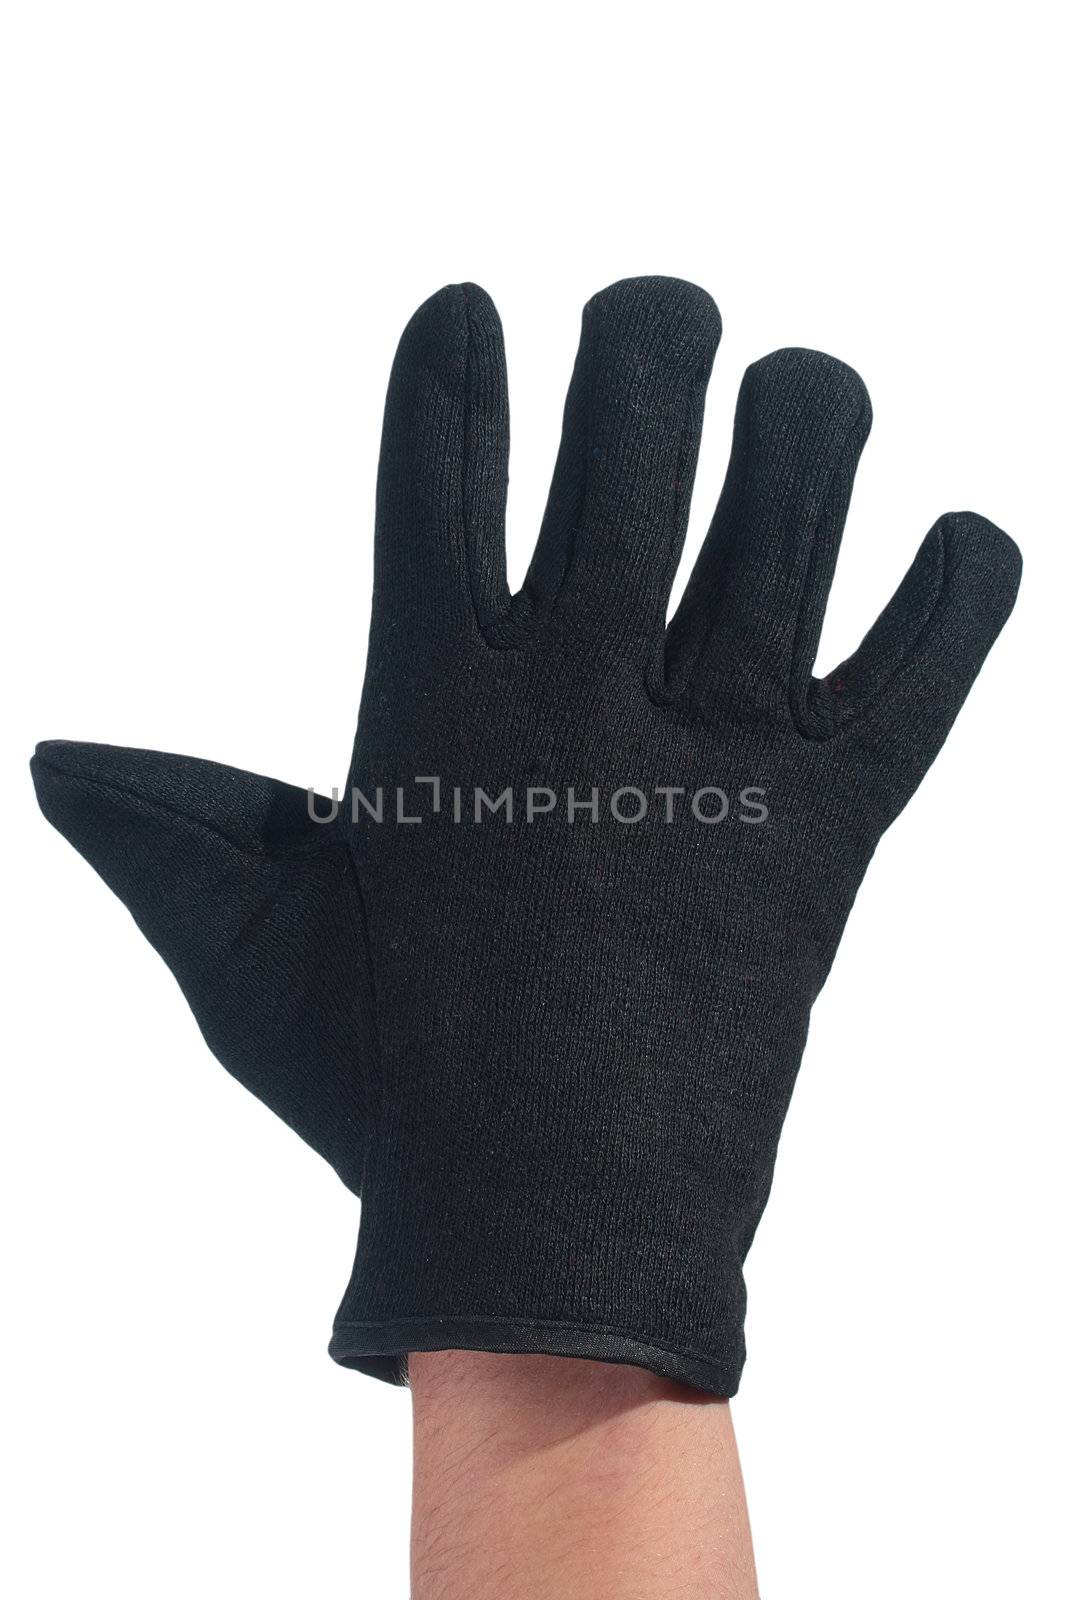 Man's hand in a black glove made of cloth, a background white.